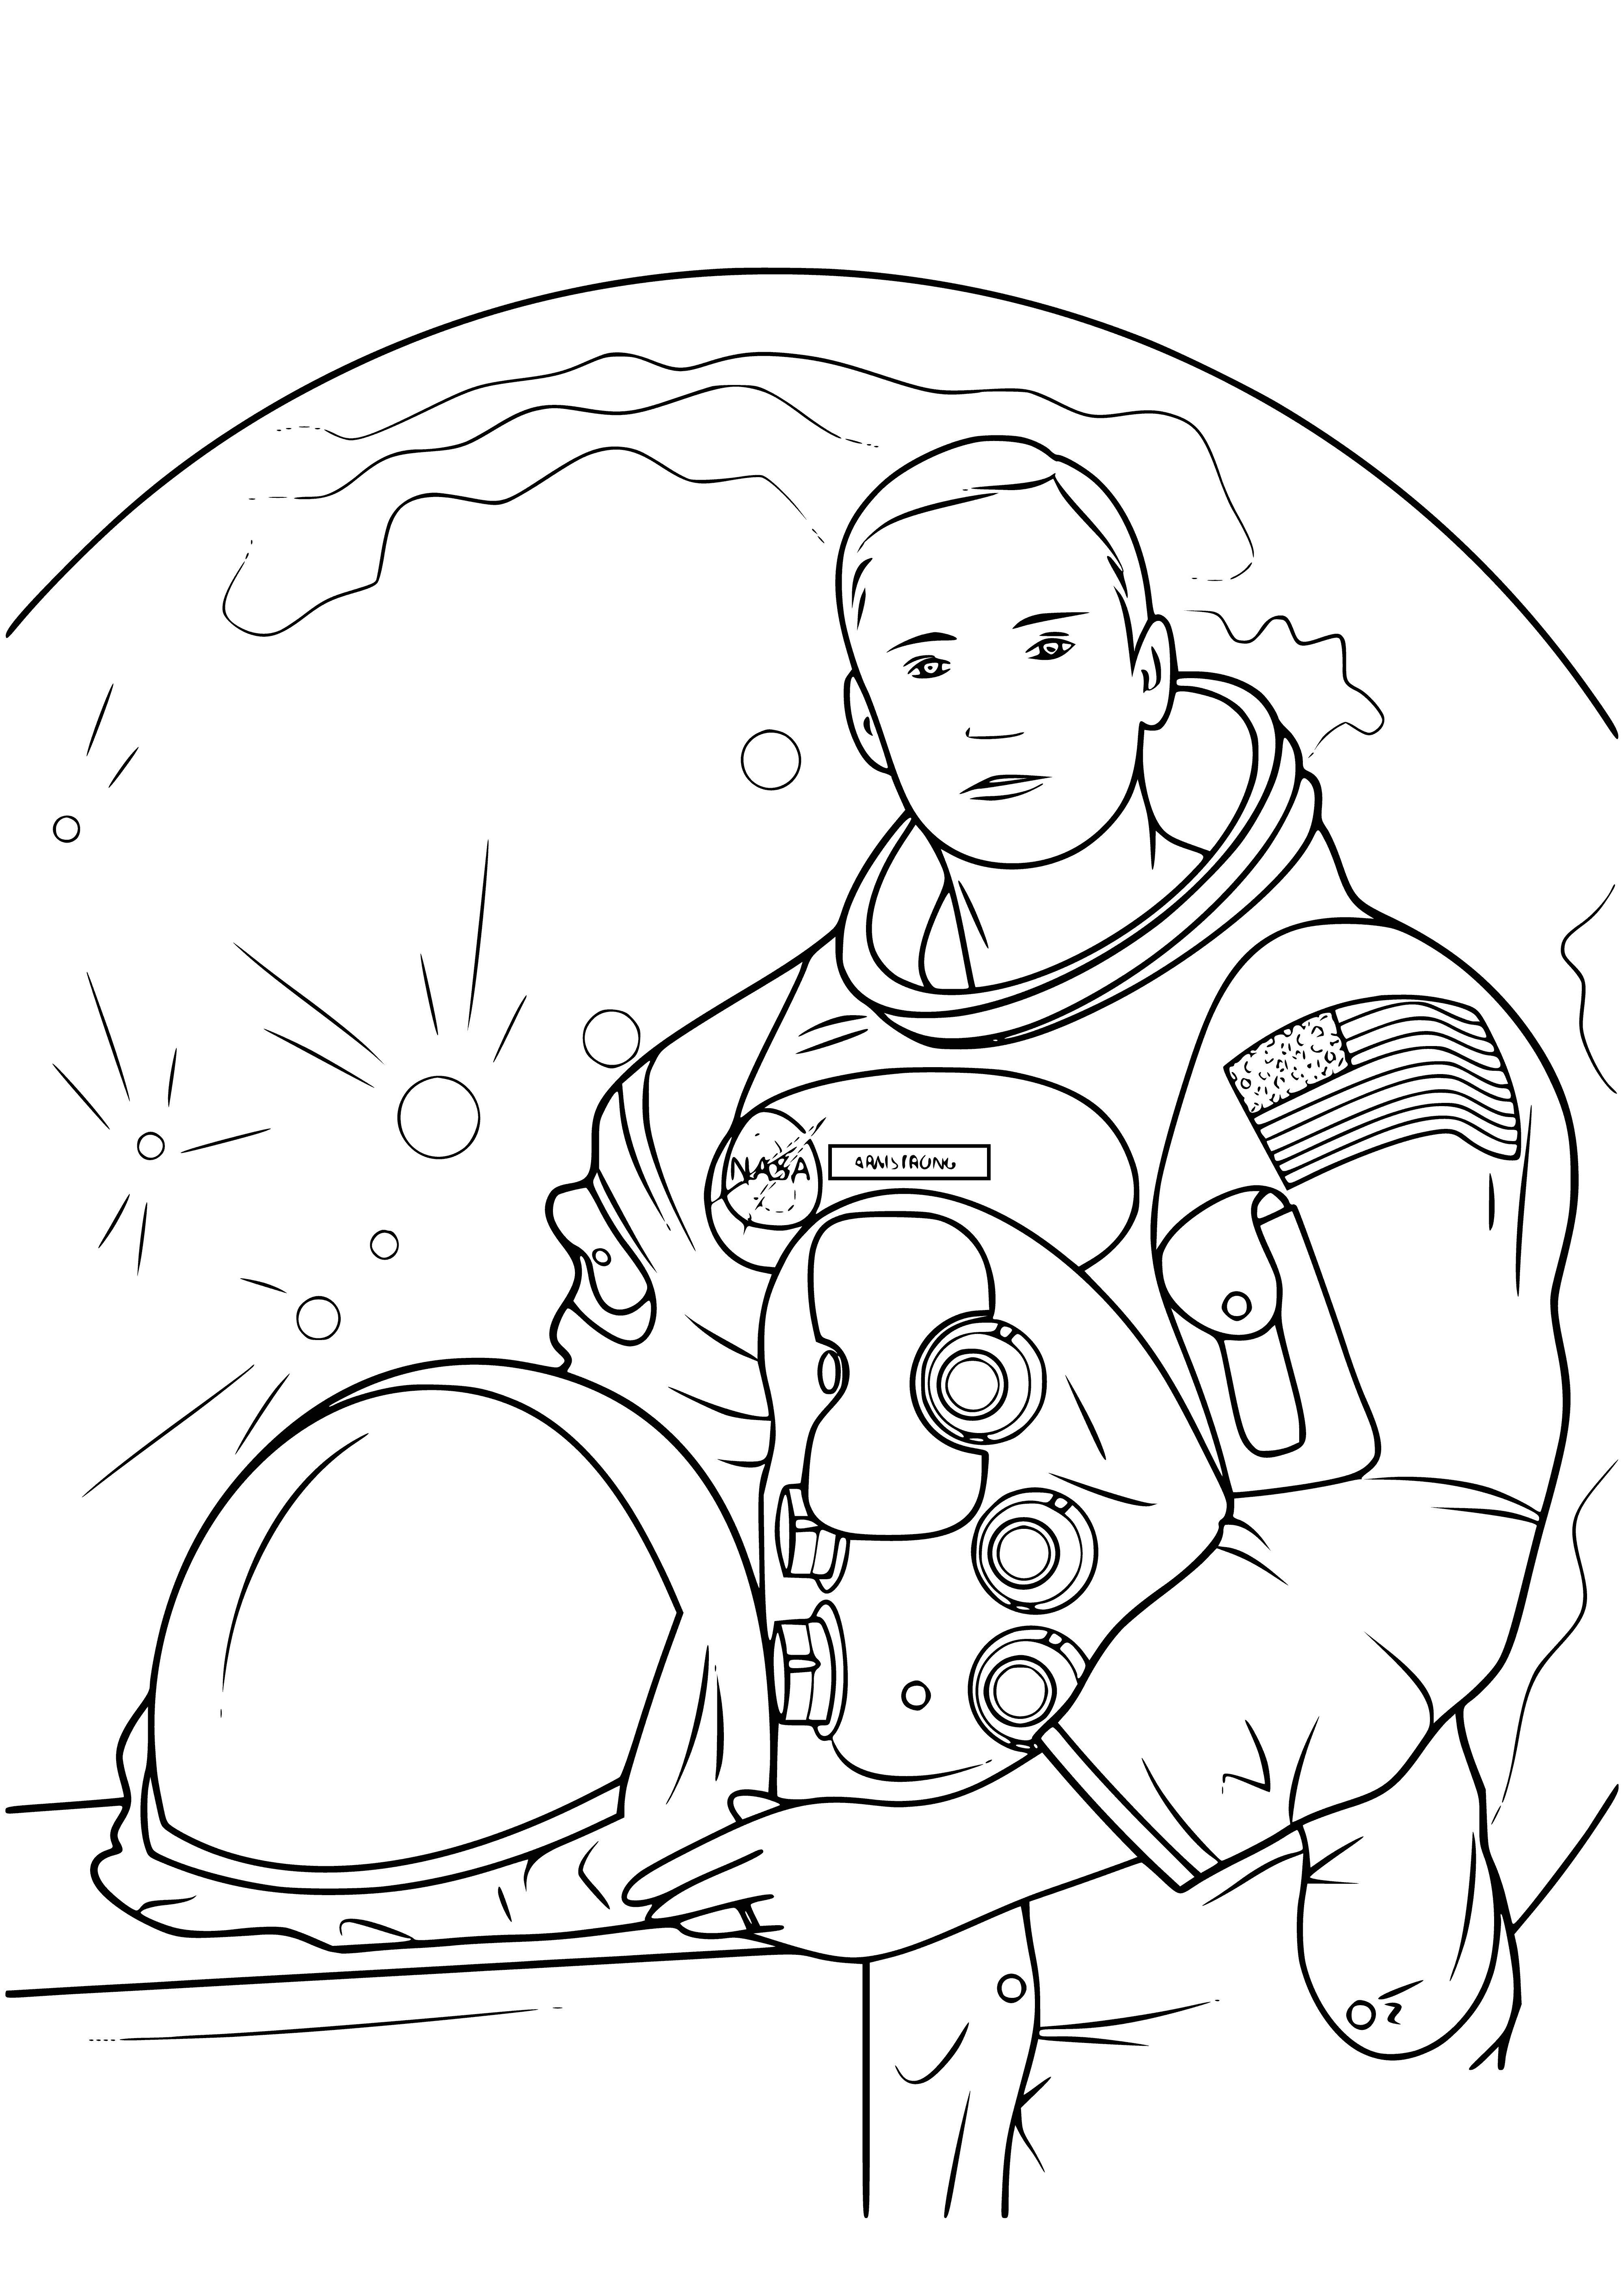 coloring page: Man stands on moon, wearing white space suit, backpack, & waving flag.